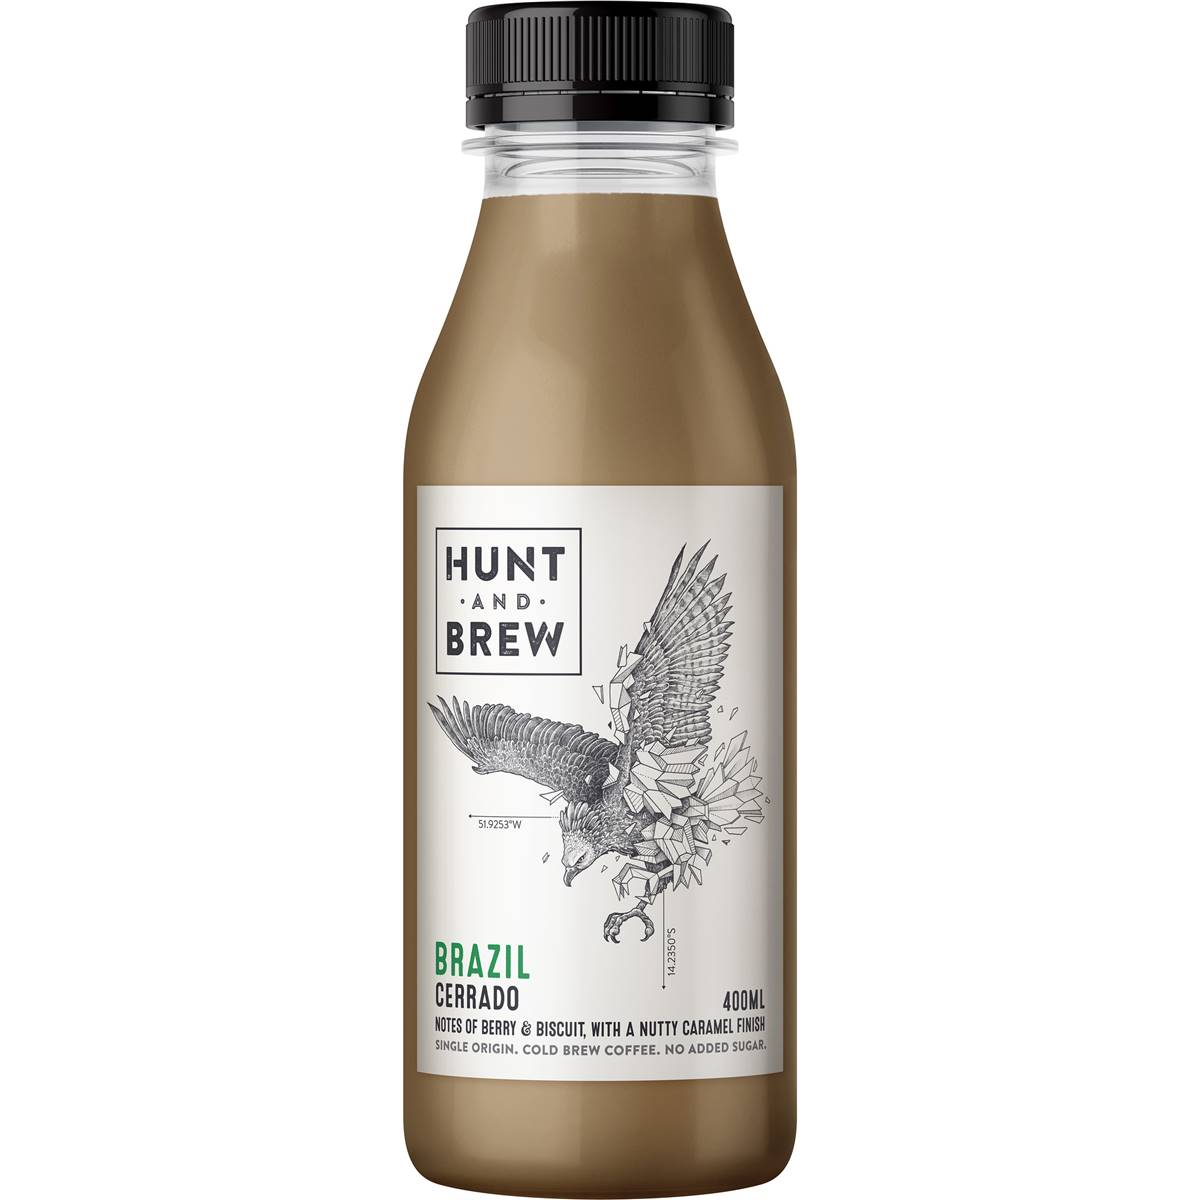 Calories in Hunt And Brew Cold Brew Coffee Brazil